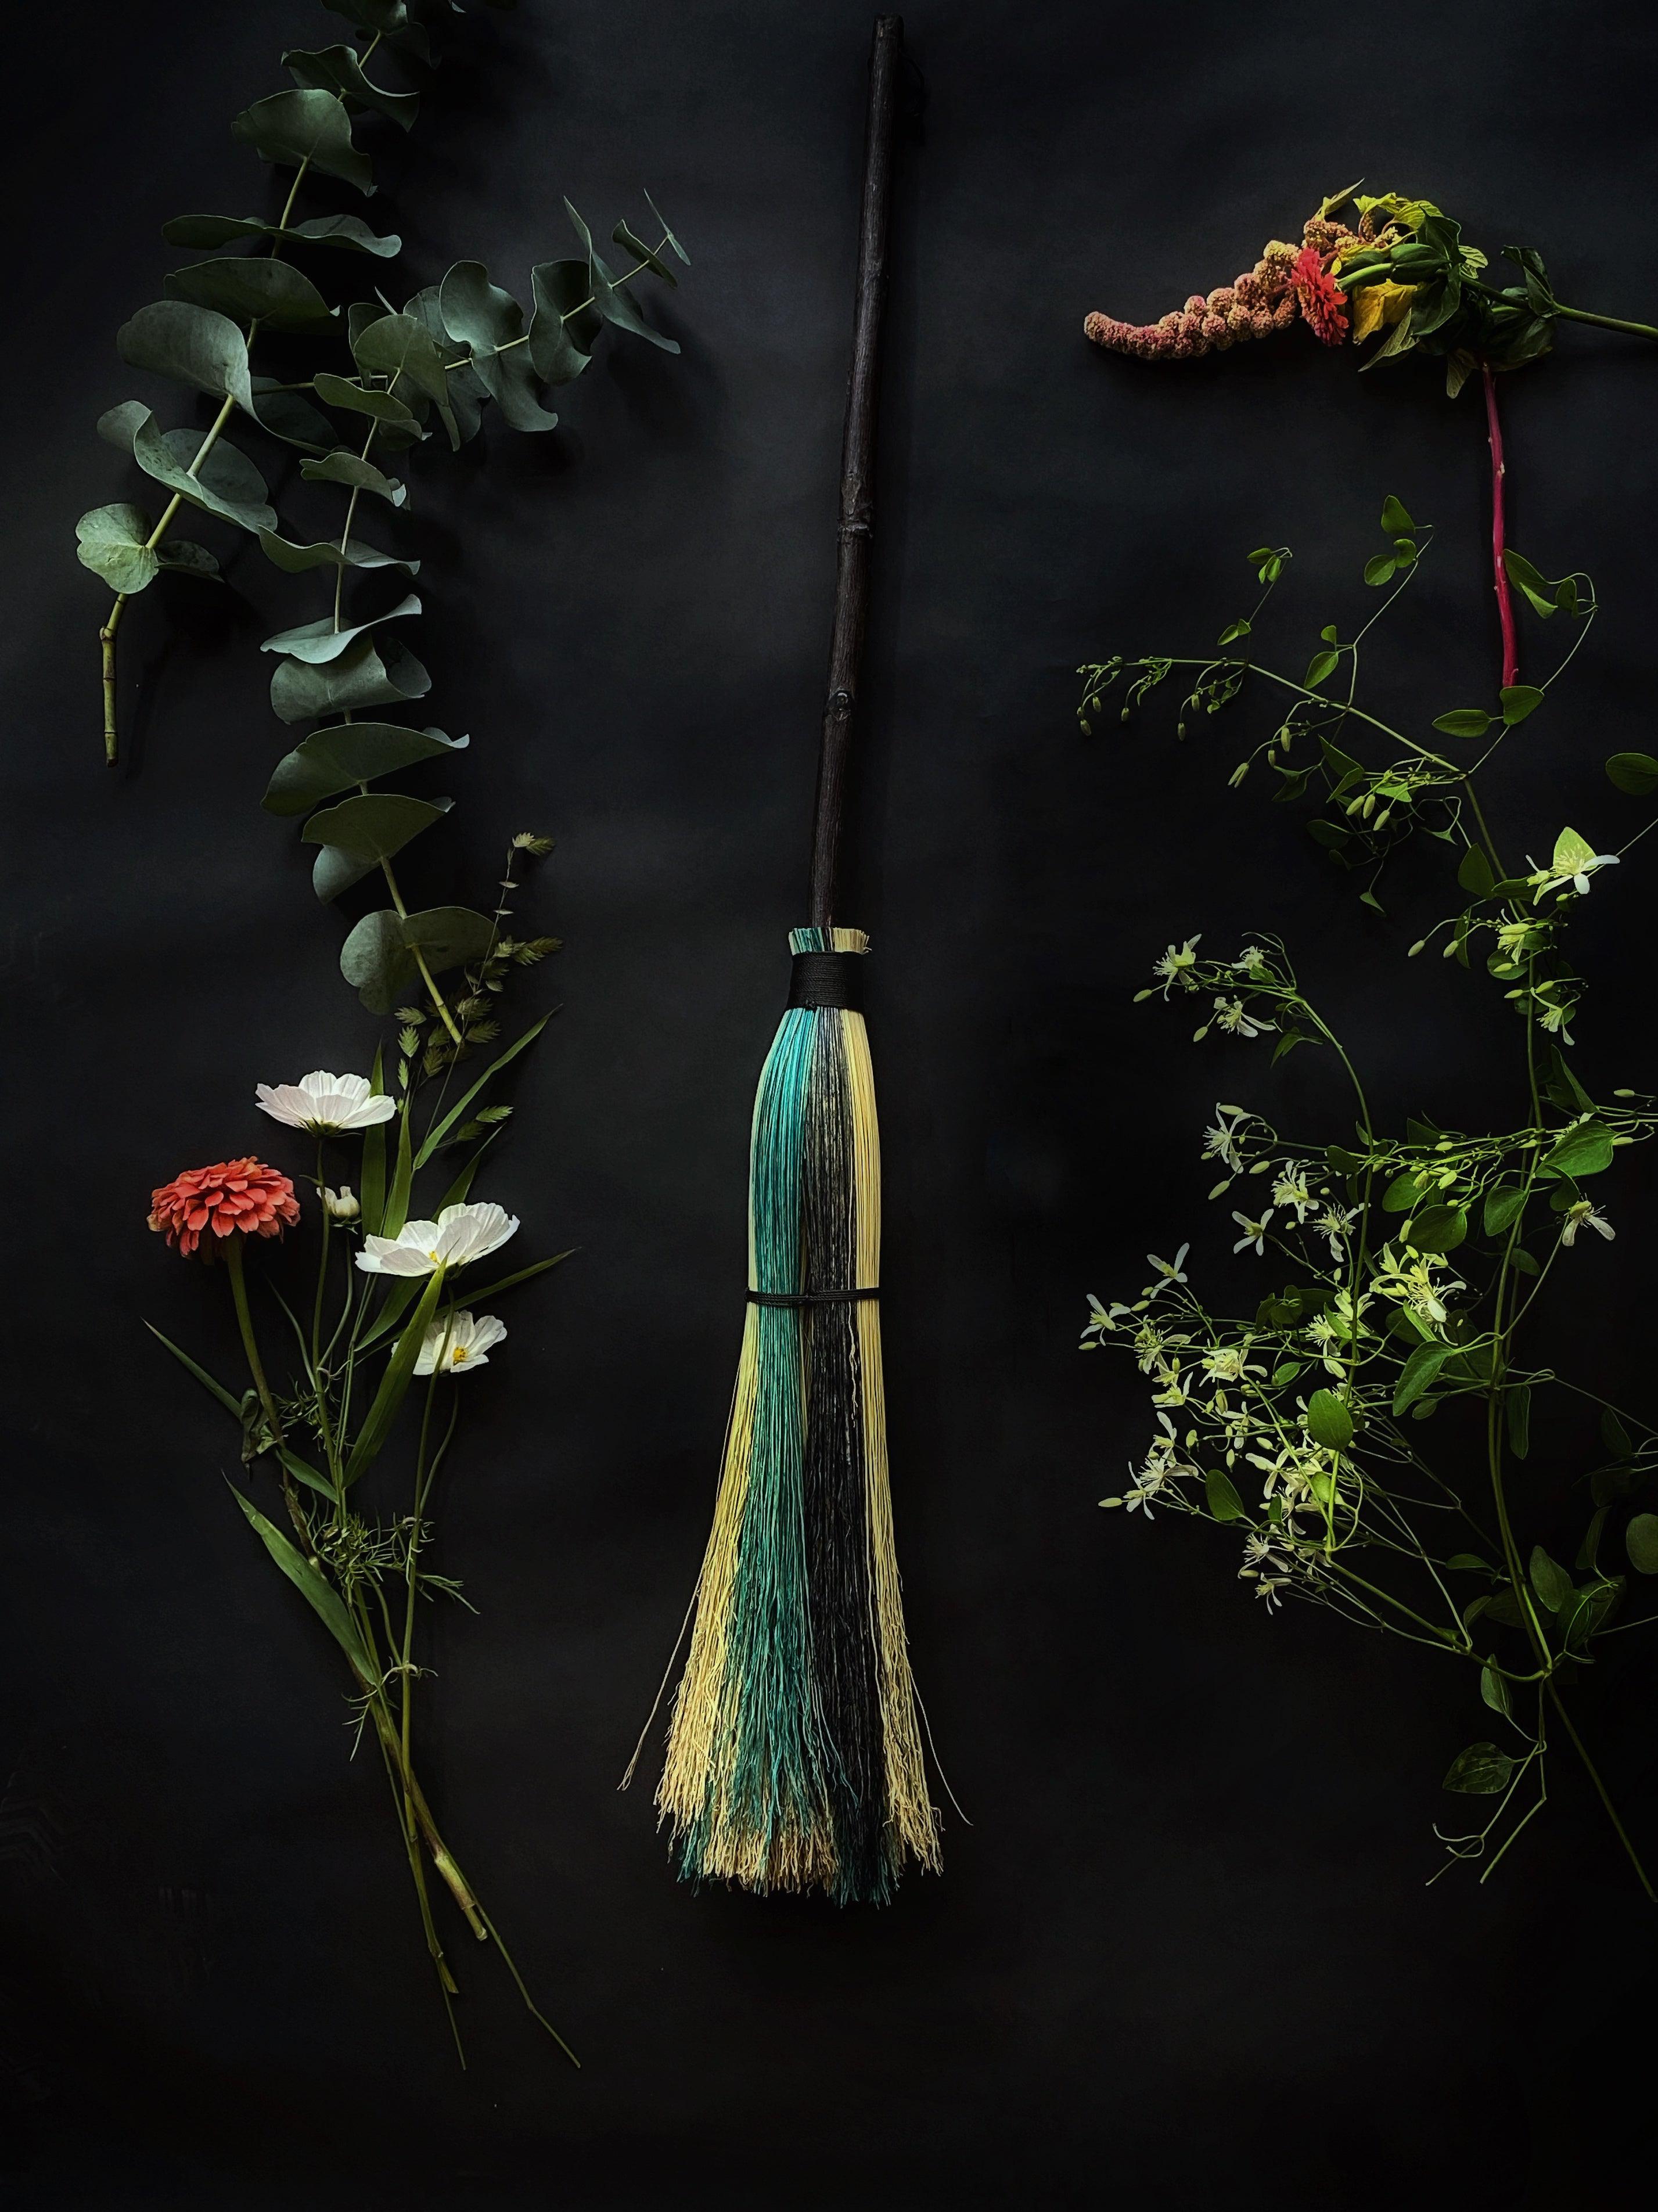 Besom Brooms and Hearth Besom Brooms - Keven Craft Rituals